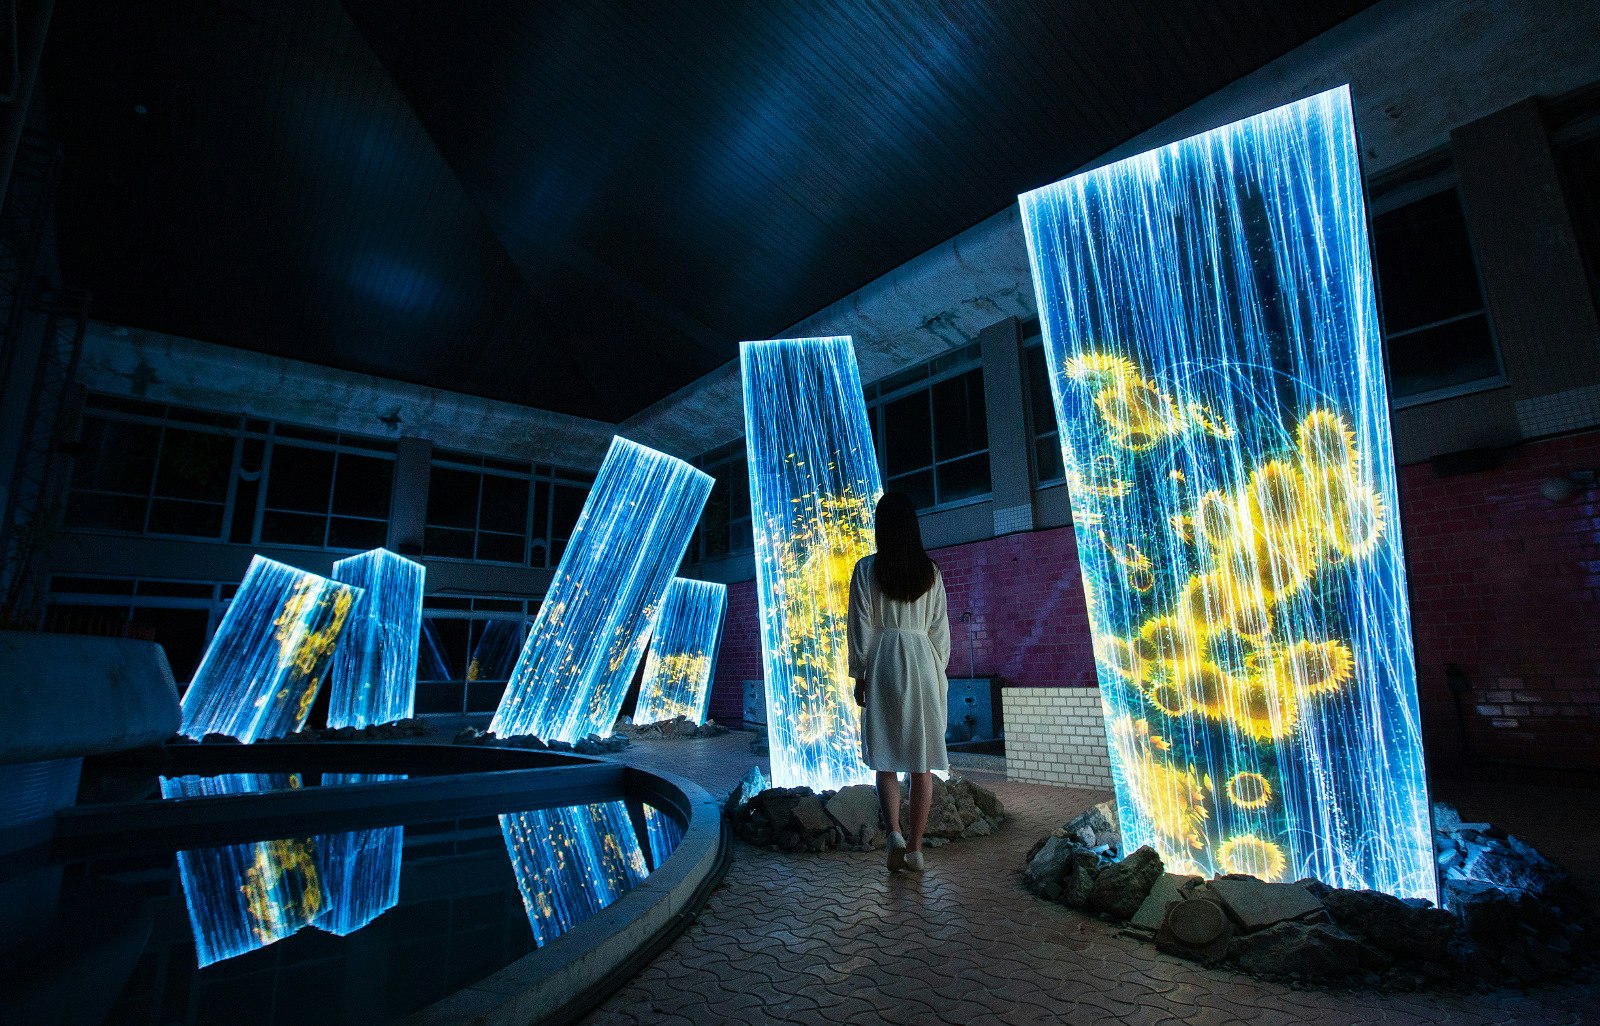 Megaliths in the Bath House Ruins from teamLab: A Forest Where Gods Live, Ruins and Heritage - THE NATURE OF TIME.